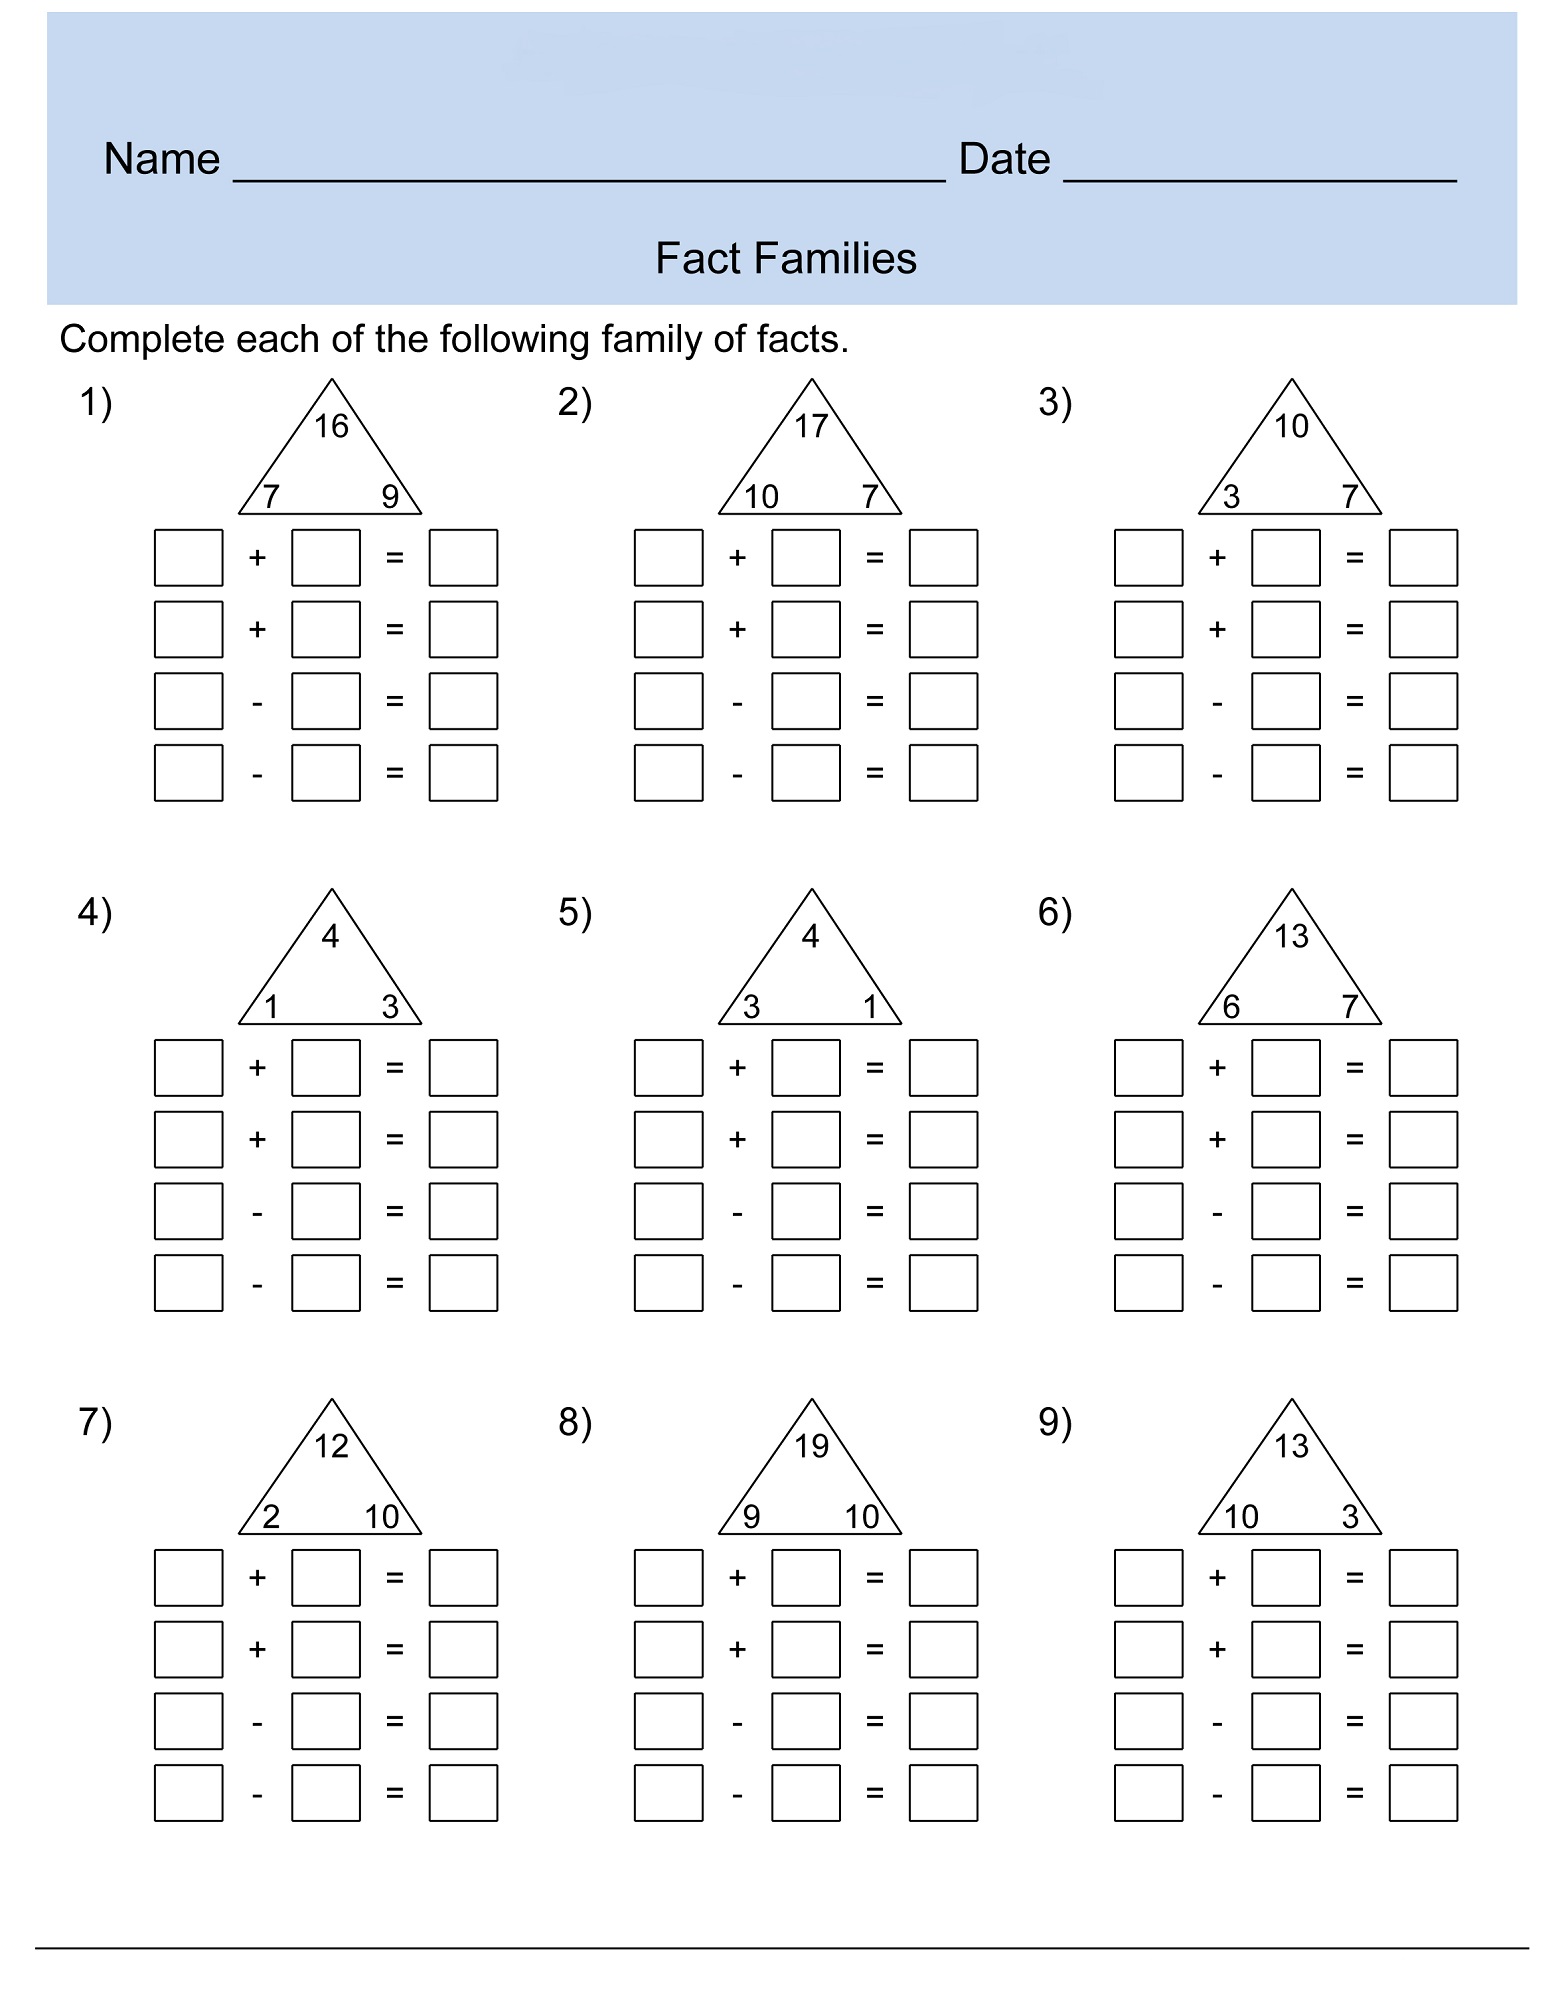 fact-family-worksheets